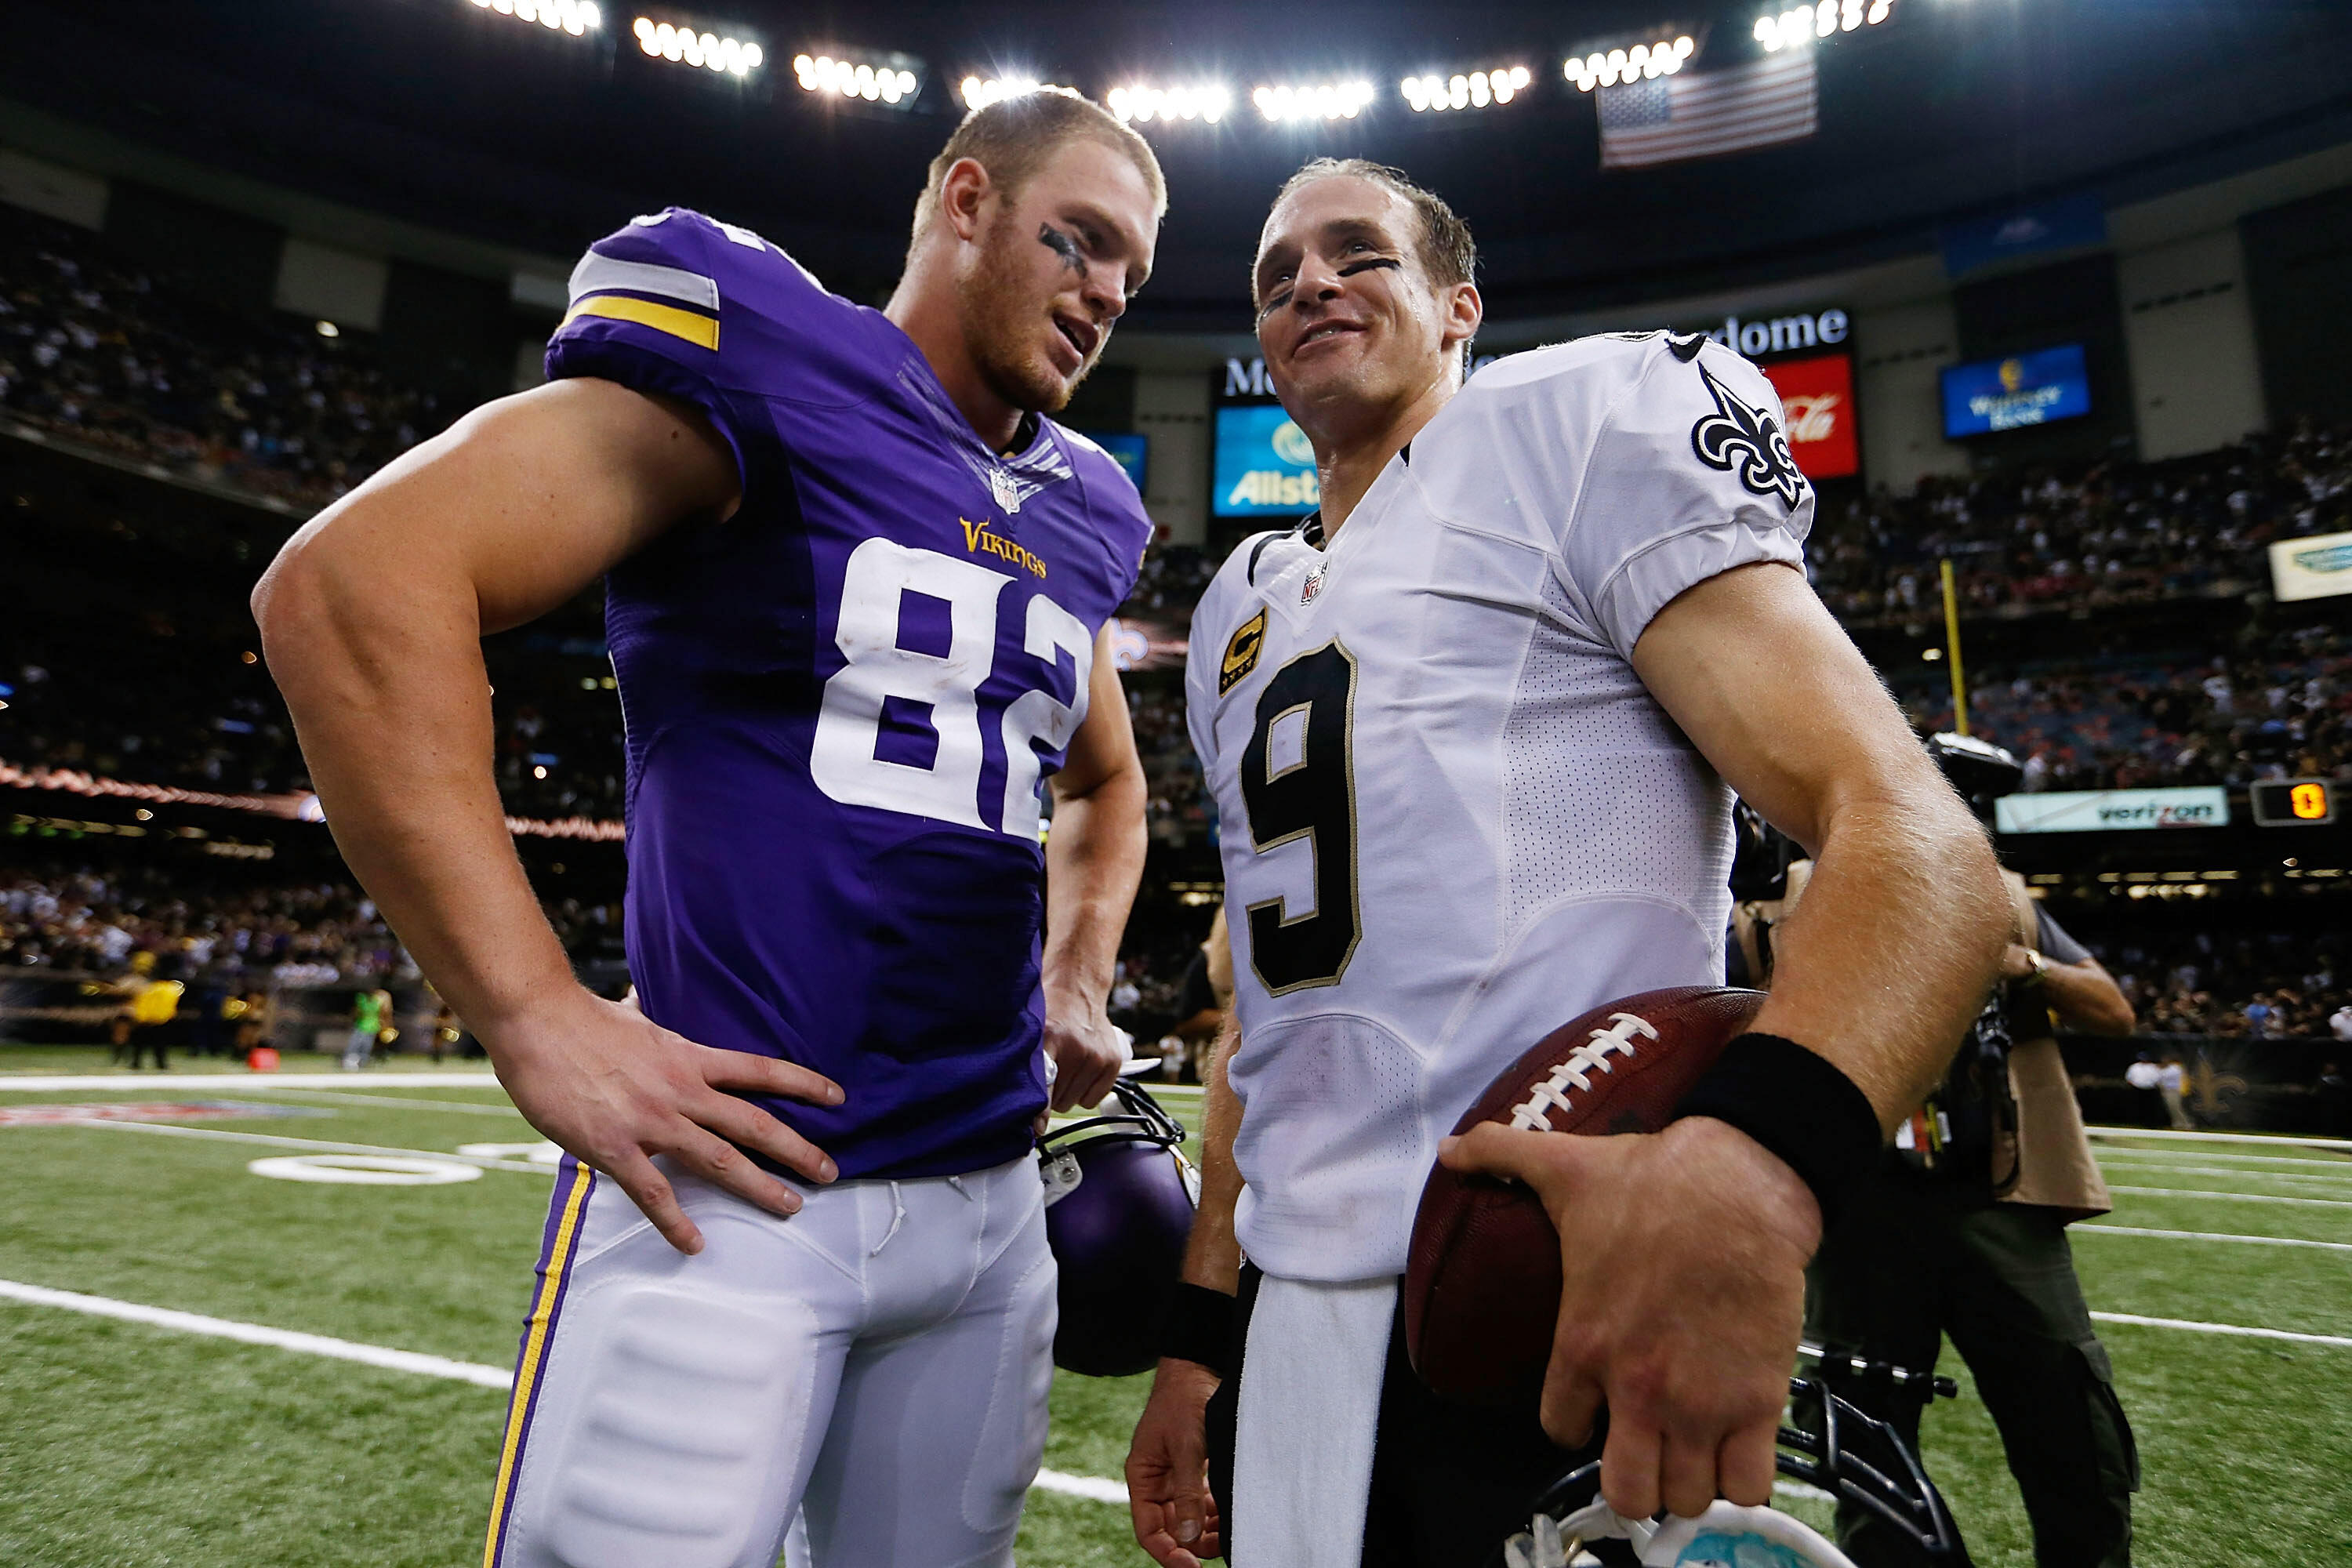 NEW ORLEANS, LA - SEPTEMBER 21:  Drew Brees #9 of the New Orleans Saints speaks with Kyle Rudolph #82 of the Minnesota Vikings following a game at the Mercedes-Benz Superdome on September 21, 2014 in New Orleans, Louisiana.  (Photo by Sean Gardner/Getty I